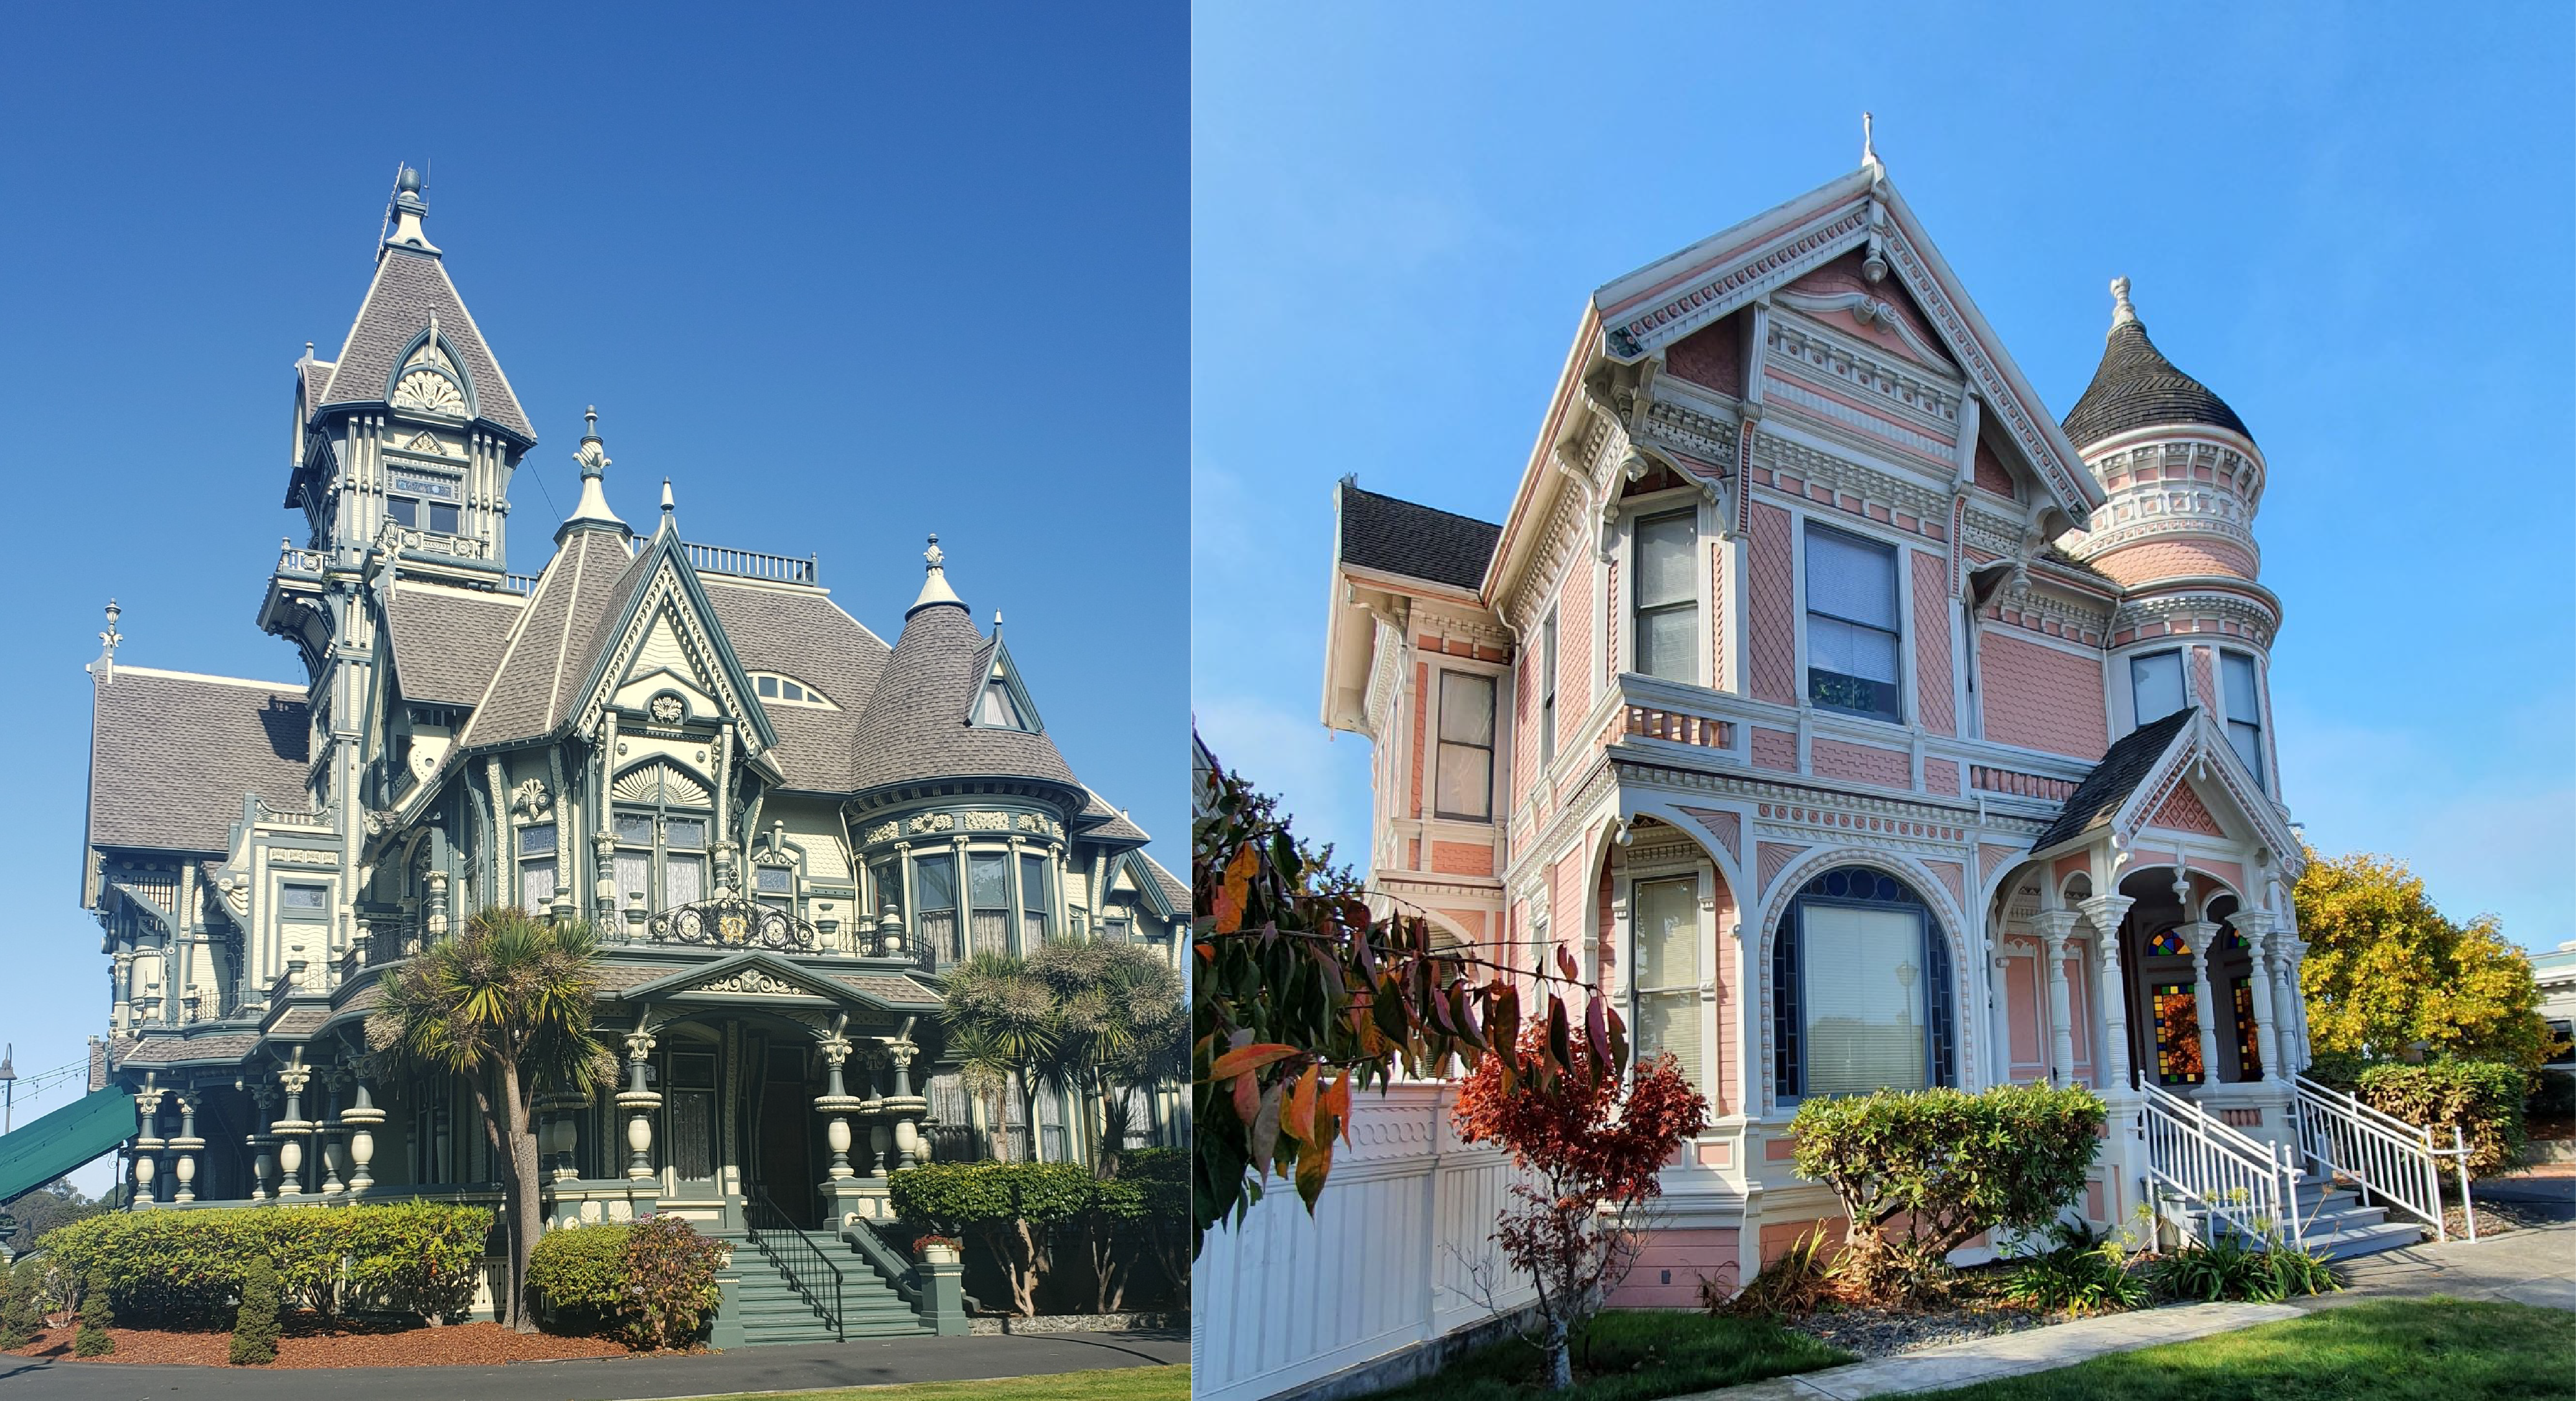 Left image of a grey Victorian style manor and right image of a pink Victorian style manor